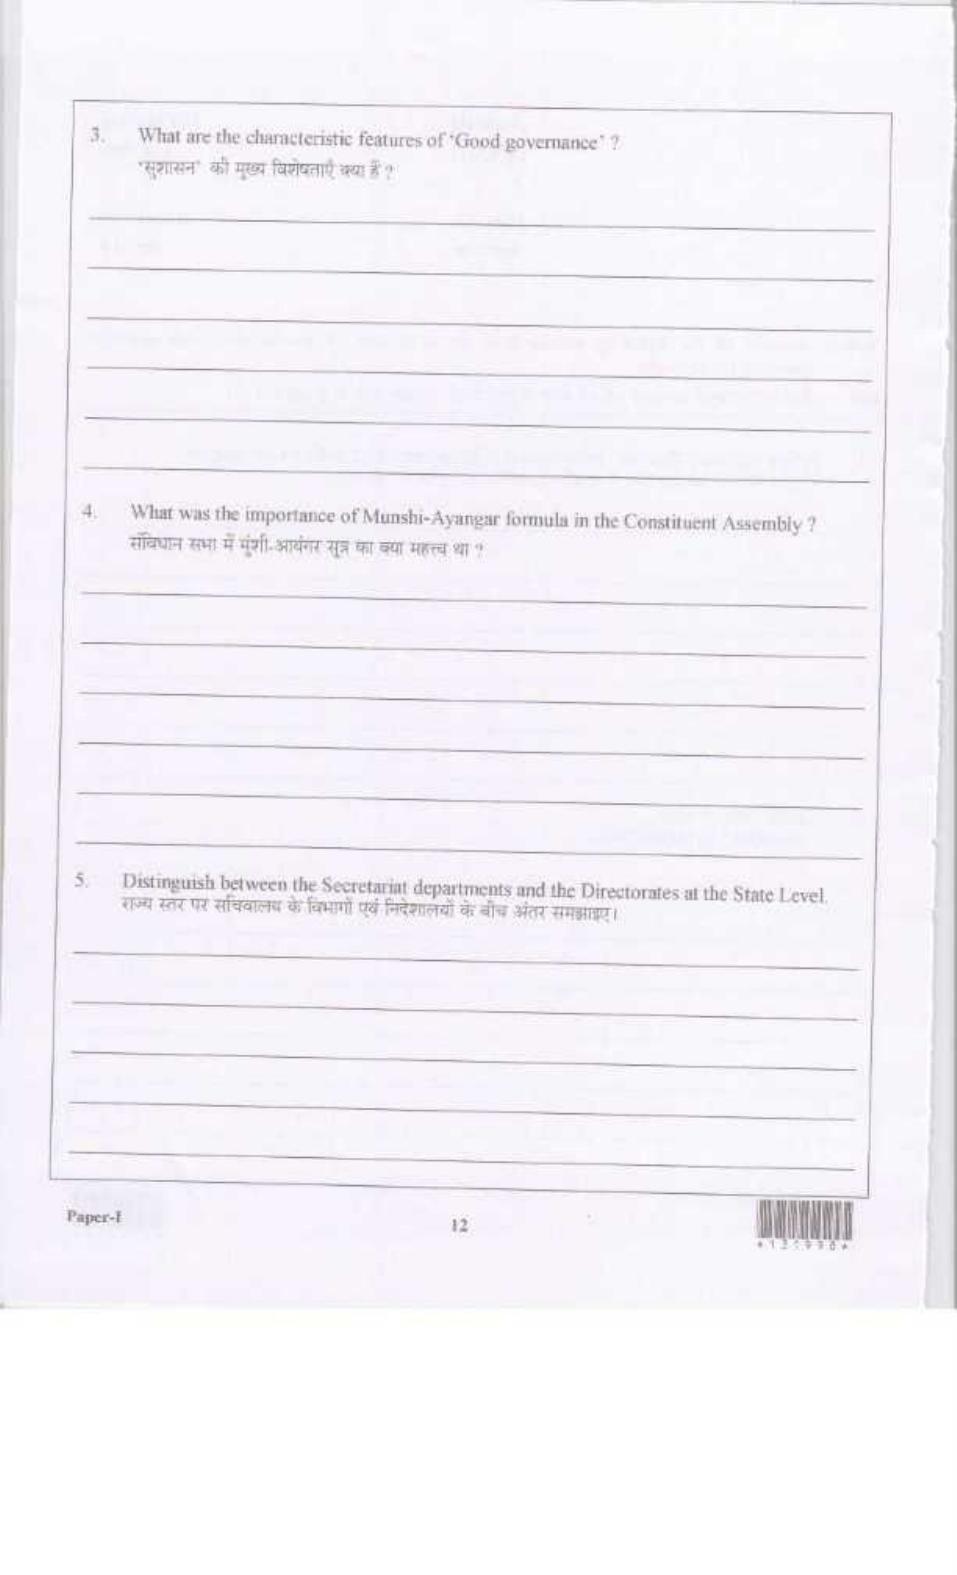 LUVAS Non-Teaching Sample Papers - Socio-Economic and Experience - Page 18